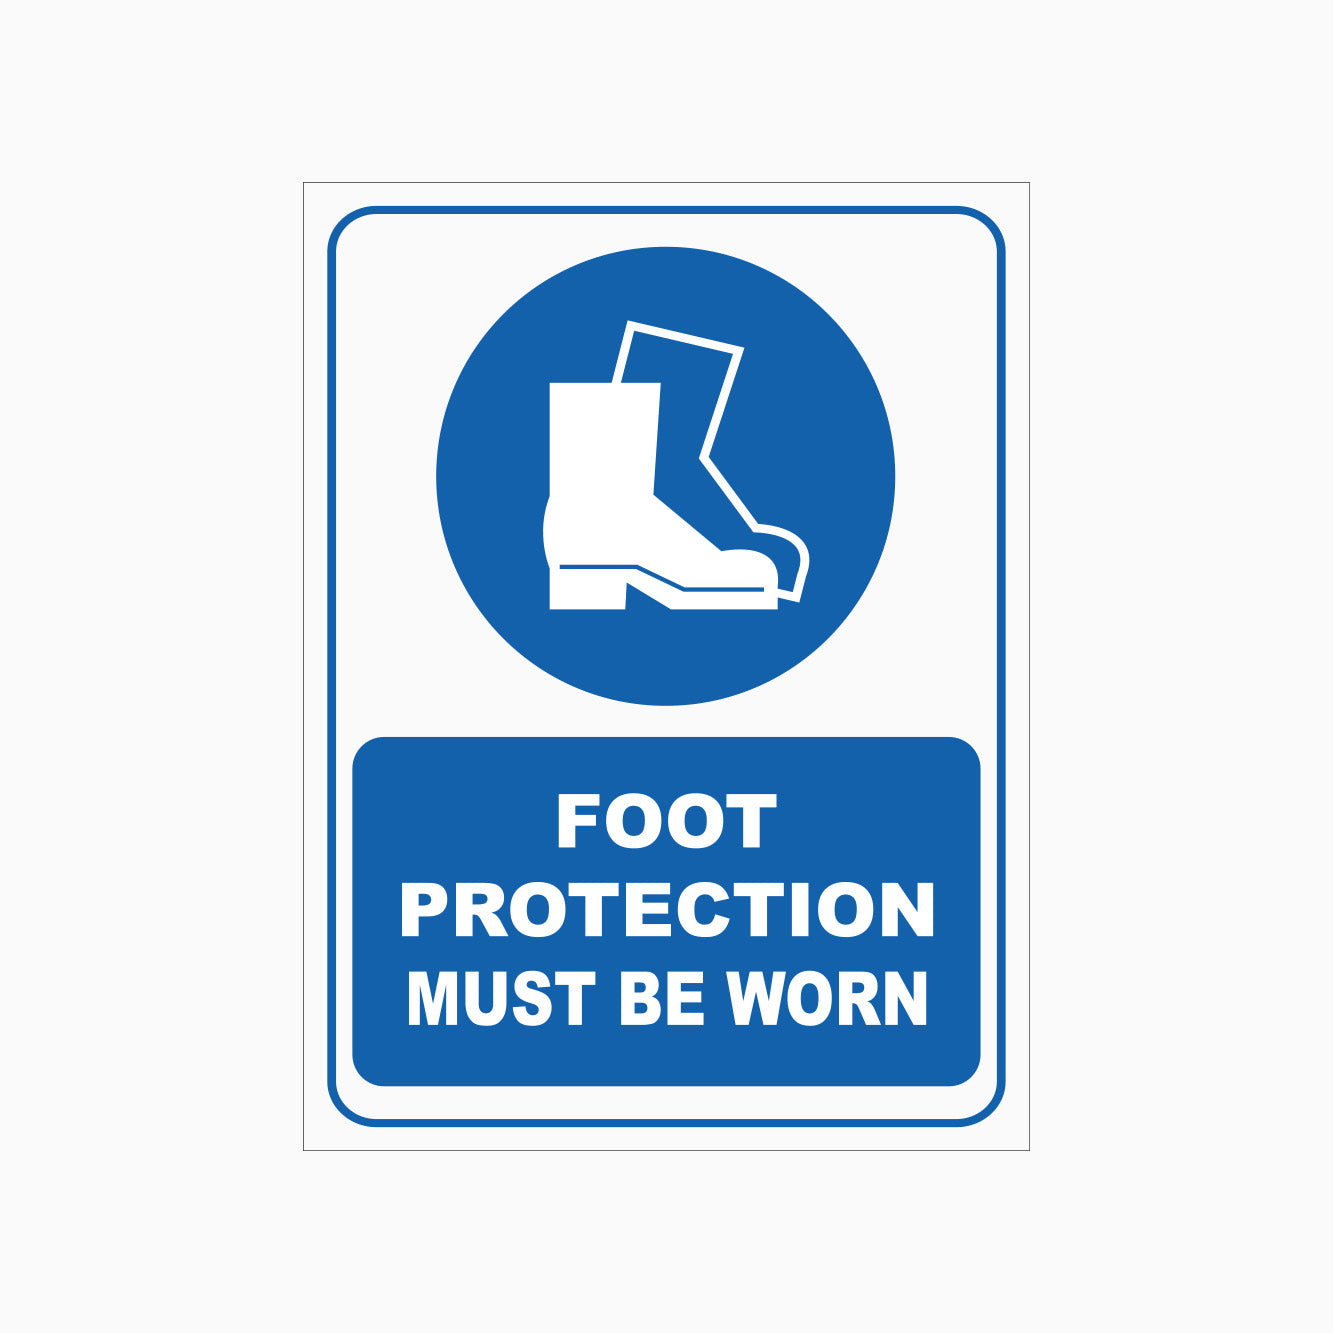 FOOT PROTECTION MUST BE WORN SIGN  - GET SIGNS